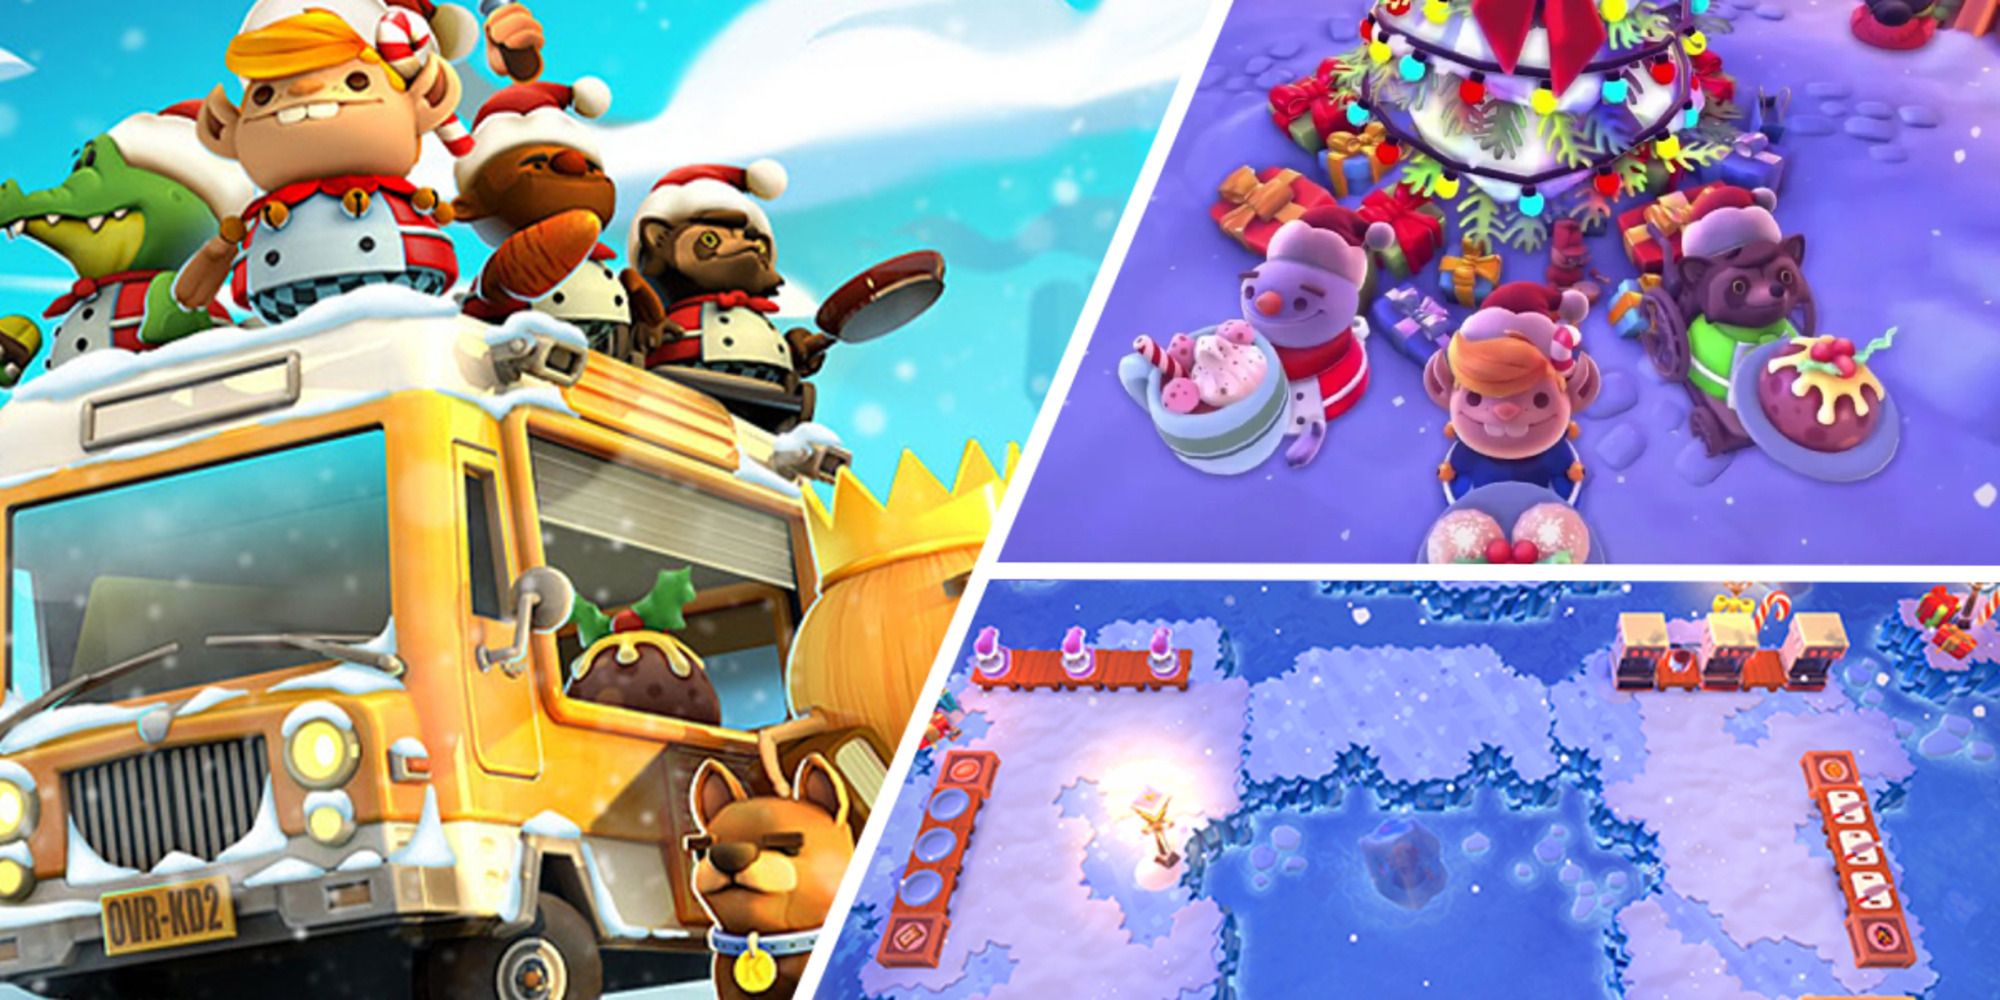 Kenny's Christmas Cracker cover picture, in-game footage, and level design in Overcooked 2.